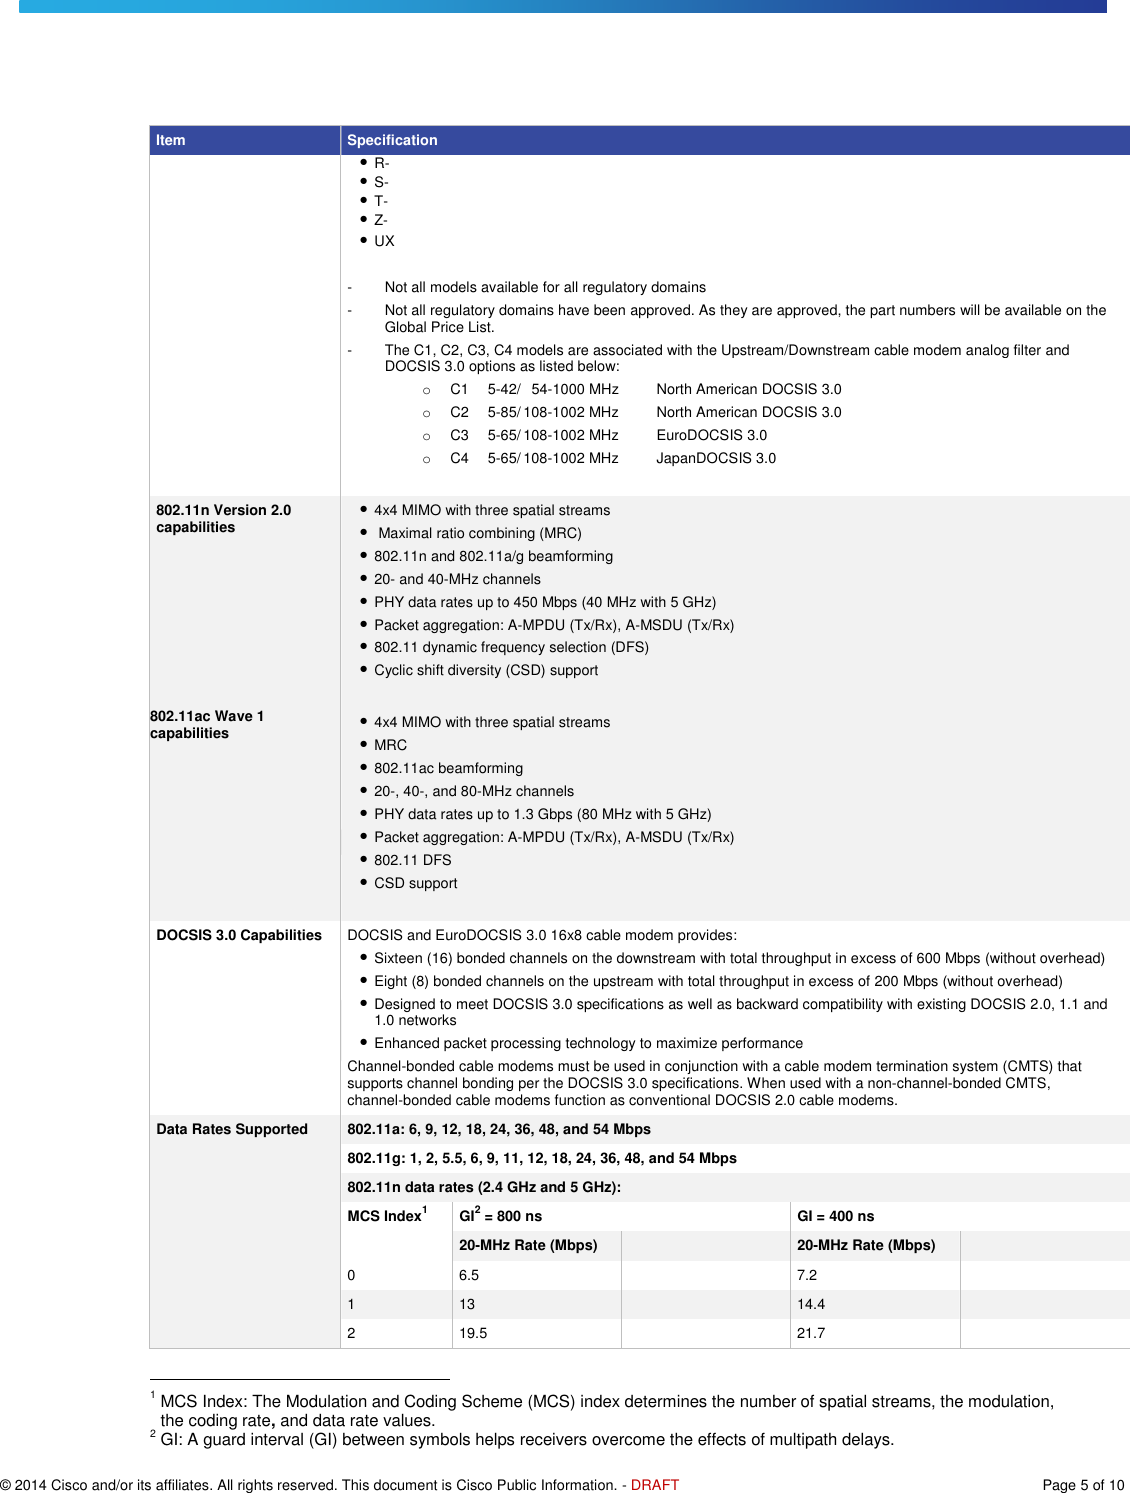   © 2014 Cisco and/or its affiliates. All rights reserved. This document is Cisco Public Information. - DRAFT  Page 5 of 10 Item Specification ● R- ● S- ● T- ● Z- ● UX  -  Not all models available for all regulatory domains -  Not all regulatory domains have been approved. As they are approved, the part numbers will be available on the Global Price List. -  The C1, C2, C3, C4 models are associated with the Upstream/Downstream cable modem analog filter and DOCSIS 3.0 options as listed below: o C1  5-42/  54-1000 MHz  North American DOCSIS 3.0 o C2  5-85/ 108-1002 MHz  North American DOCSIS 3.0 o C3  5-65/ 108-1002 MHz  EuroDOCSIS 3.0 o C4  5-65/ 108-1002 MHz  JapanDOCSIS 3.0  802.11n Version 2.0 capabilities ● 4x4 MIMO with three spatial streams  ●  Maximal ratio combining (MRC)  ● 802.11n and 802.11a/g beamforming  ● 20- and 40-MHz channels  ● PHY data rates up to 450 Mbps (40 MHz with 5 GHz)  ● Packet aggregation: A-MPDU (Tx/Rx), A-MSDU (Tx/Rx)  ● 802.11 dynamic frequency selection (DFS)  ● Cyclic shift diversity (CSD) support   802.11ac Wave 1 capabilities   ● 4x4 MIMO with three spatial streams  ● MRC  ● 802.11ac beamforming  ● 20-, 40-, and 80-MHz channels  ● PHY data rates up to 1.3 Gbps (80 MHz with 5 GHz)  ● Packet aggregation: A-MPDU (Tx/Rx), A-MSDU (Tx/Rx)  ● 802.11 DFS  ● CSD support   DOCSIS 3.0 Capabilities DOCSIS and EuroDOCSIS 3.0 16x8 cable modem provides: ● Sixteen (16) bonded channels on the downstream with total throughput in excess of 600 Mbps (without overhead) ● Eight (8) bonded channels on the upstream with total throughput in excess of 200 Mbps (without overhead) ● Designed to meet DOCSIS 3.0 specifications as well as backward compatibility with existing DOCSIS 2.0, 1.1 and 1.0 networks ● Enhanced packet processing technology to maximize performance Channel-bonded cable modems must be used in conjunction with a cable modem termination system (CMTS) that supports channel bonding per the DOCSIS 3.0 specifications. When used with a non-channel-bonded CMTS, channel-bonded cable modems function as conventional DOCSIS 2.0 cable modems. Data Rates Supported 802.11a: 6, 9, 12, 18, 24, 36, 48, and 54 Mbps 802.11g: 1, 2, 5.5, 6, 9, 11, 12, 18, 24, 36, 48, and 54 Mbps 802.11n data rates (2.4 GHz and 5 GHz): MCS Index1 GI2 = 800 ns GI = 400 ns 20-MHz Rate (Mbps)  20-MHz Rate (Mbps)  0 6.5  7.2  1 13  14.4  2 19.5  21.7                                                   1 MCS Index: The Modulation and Coding Scheme (MCS) index determines the number of spatial streams, the modulation, the coding rate, and data rate values. 2 GI: A guard interval (GI) between symbols helps receivers overcome the effects of multipath delays. 